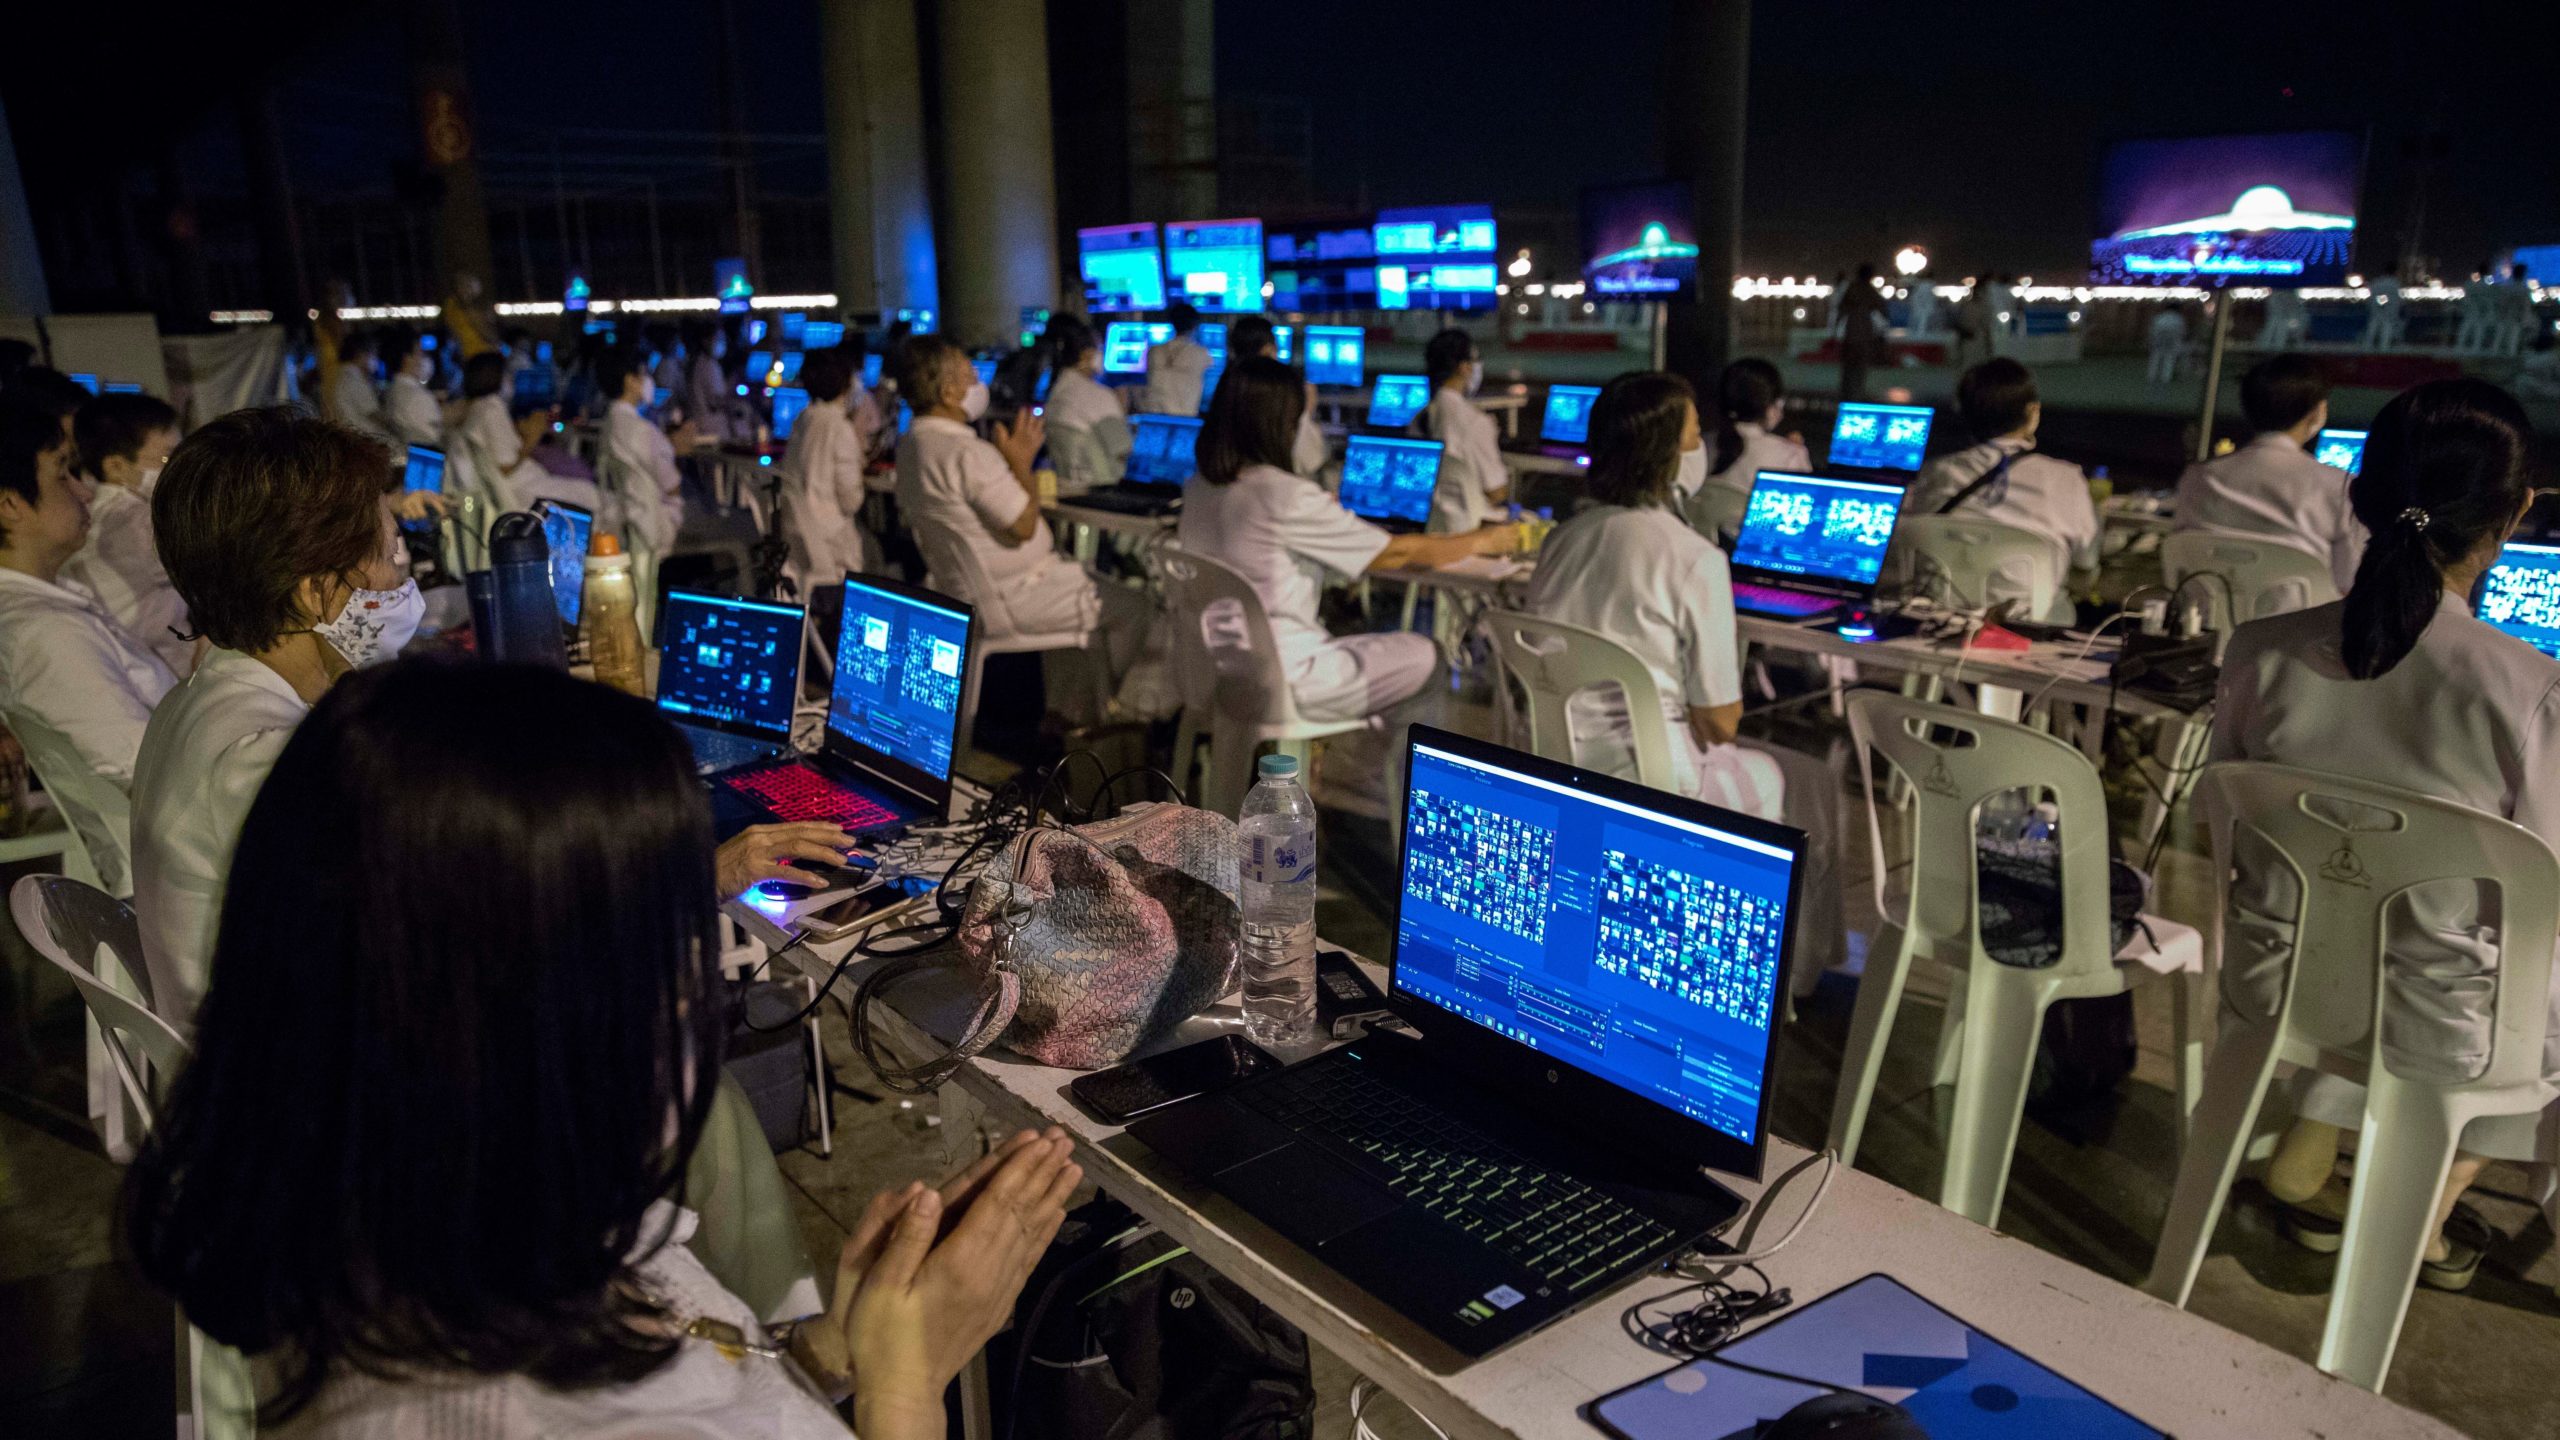 Volunteers manage a global Zoom call of over 200,000 participants at Wat Dhammakaya on February 26, 2021 in Bangkok, Thailand. (Photo: Lauren DeCicca, Getty Images)